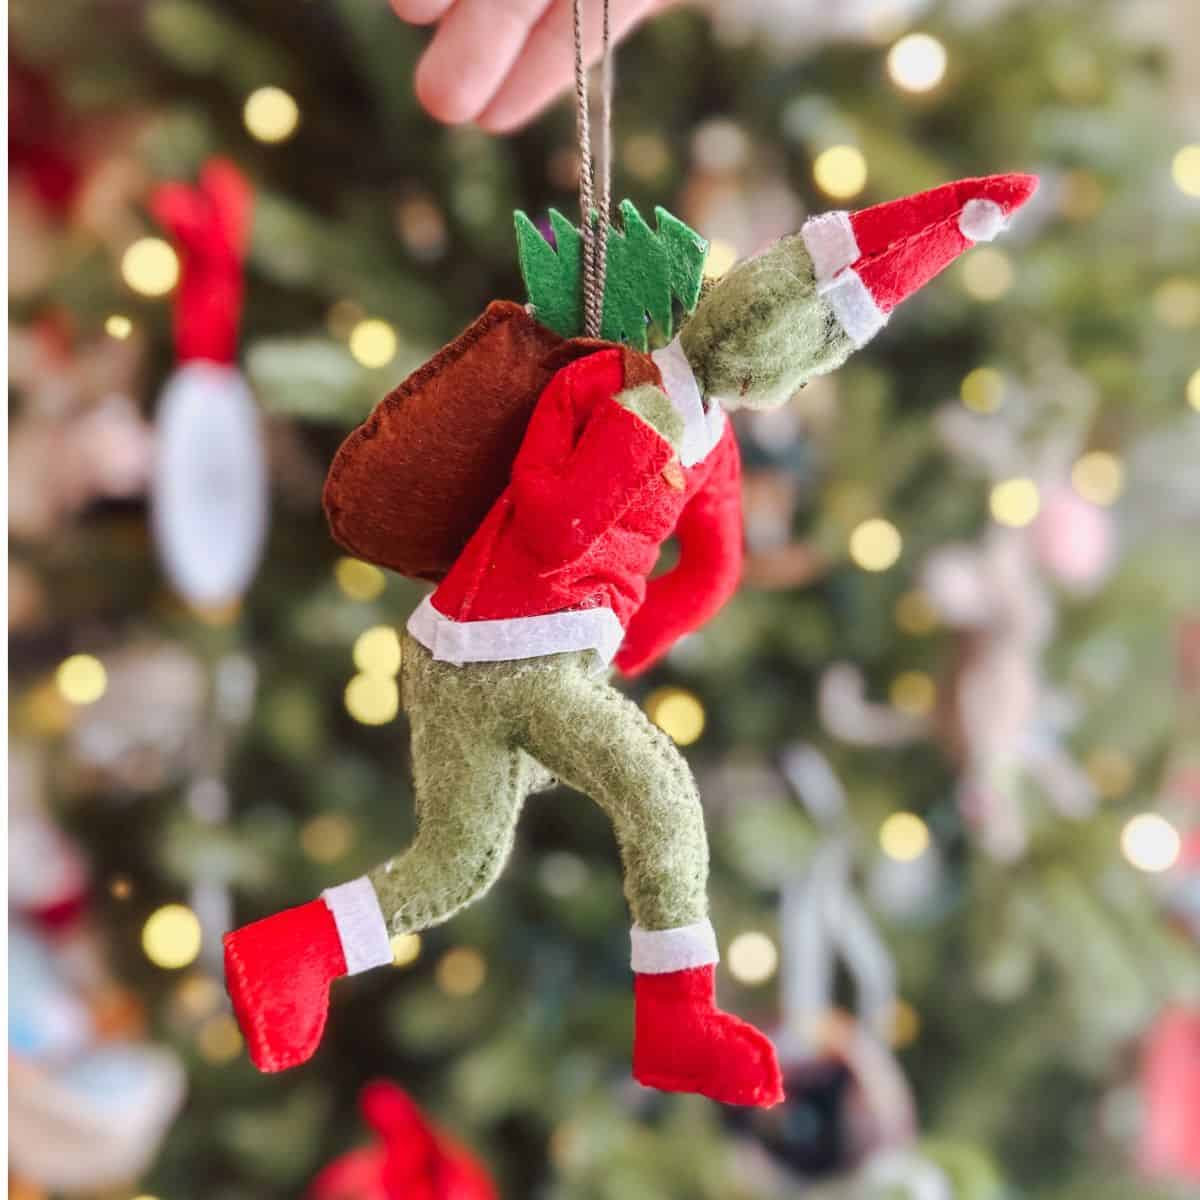 grinch ornament on christmas tree with heart ornaments.